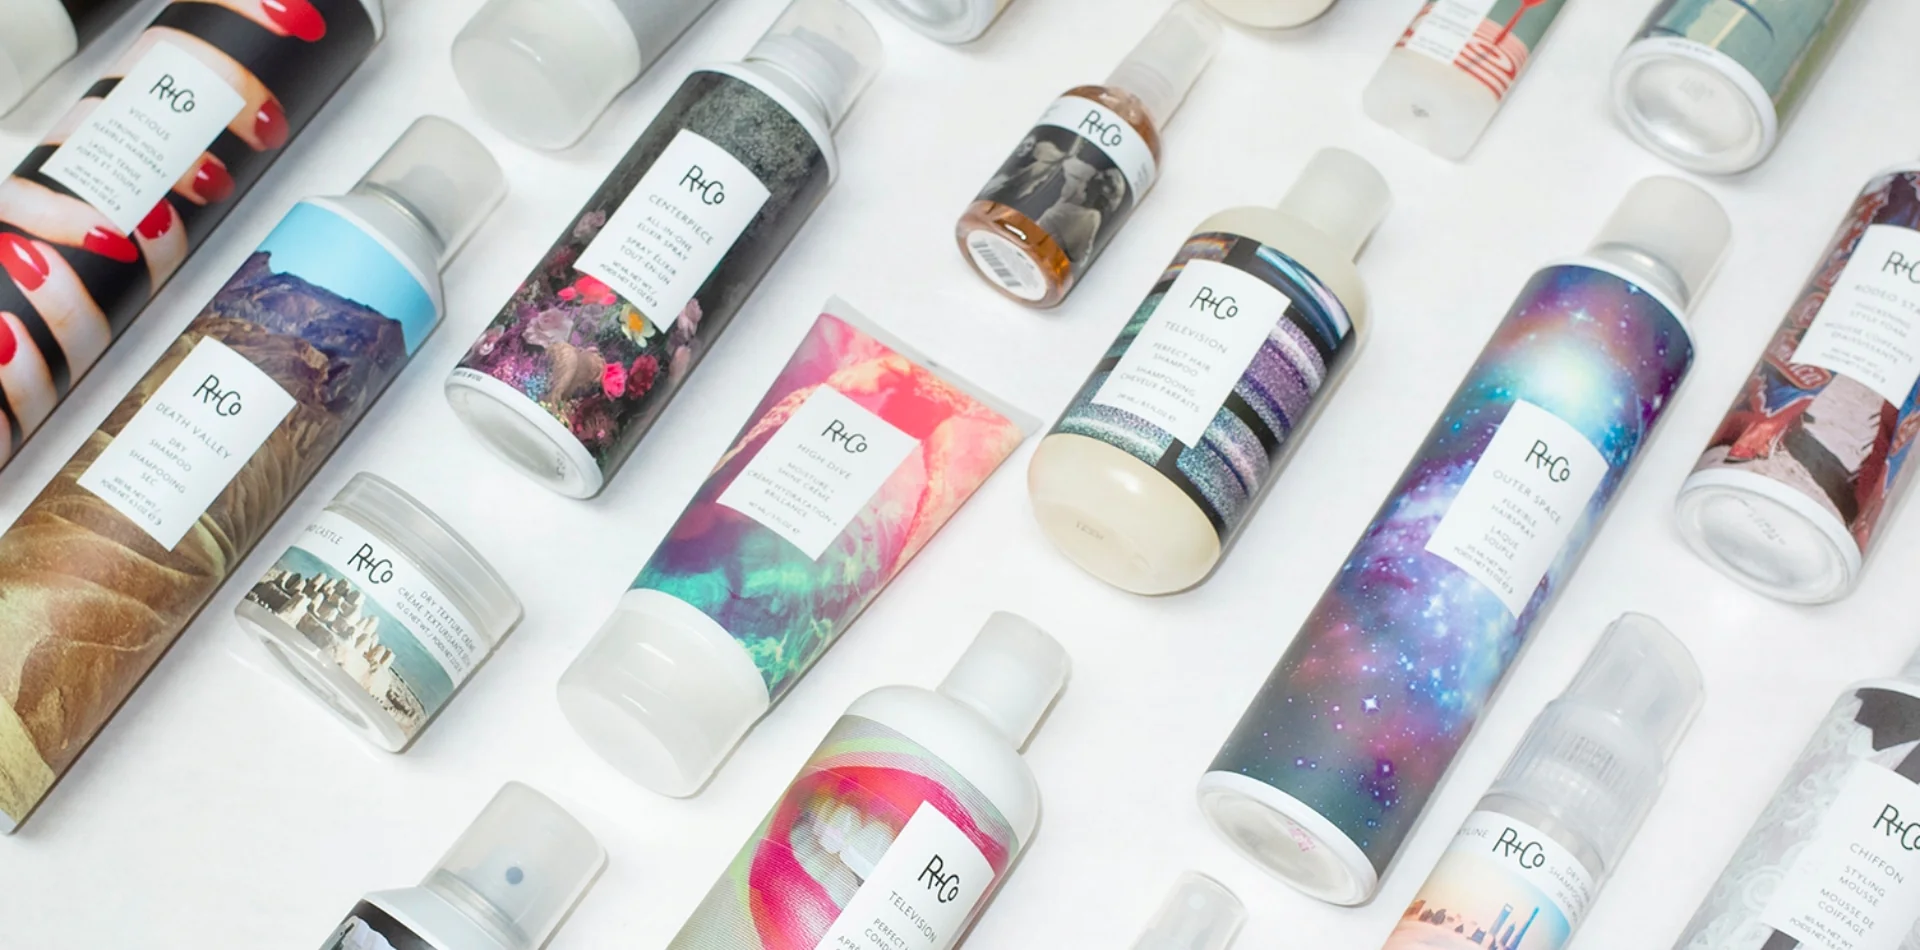 R+Co Hair Care Products